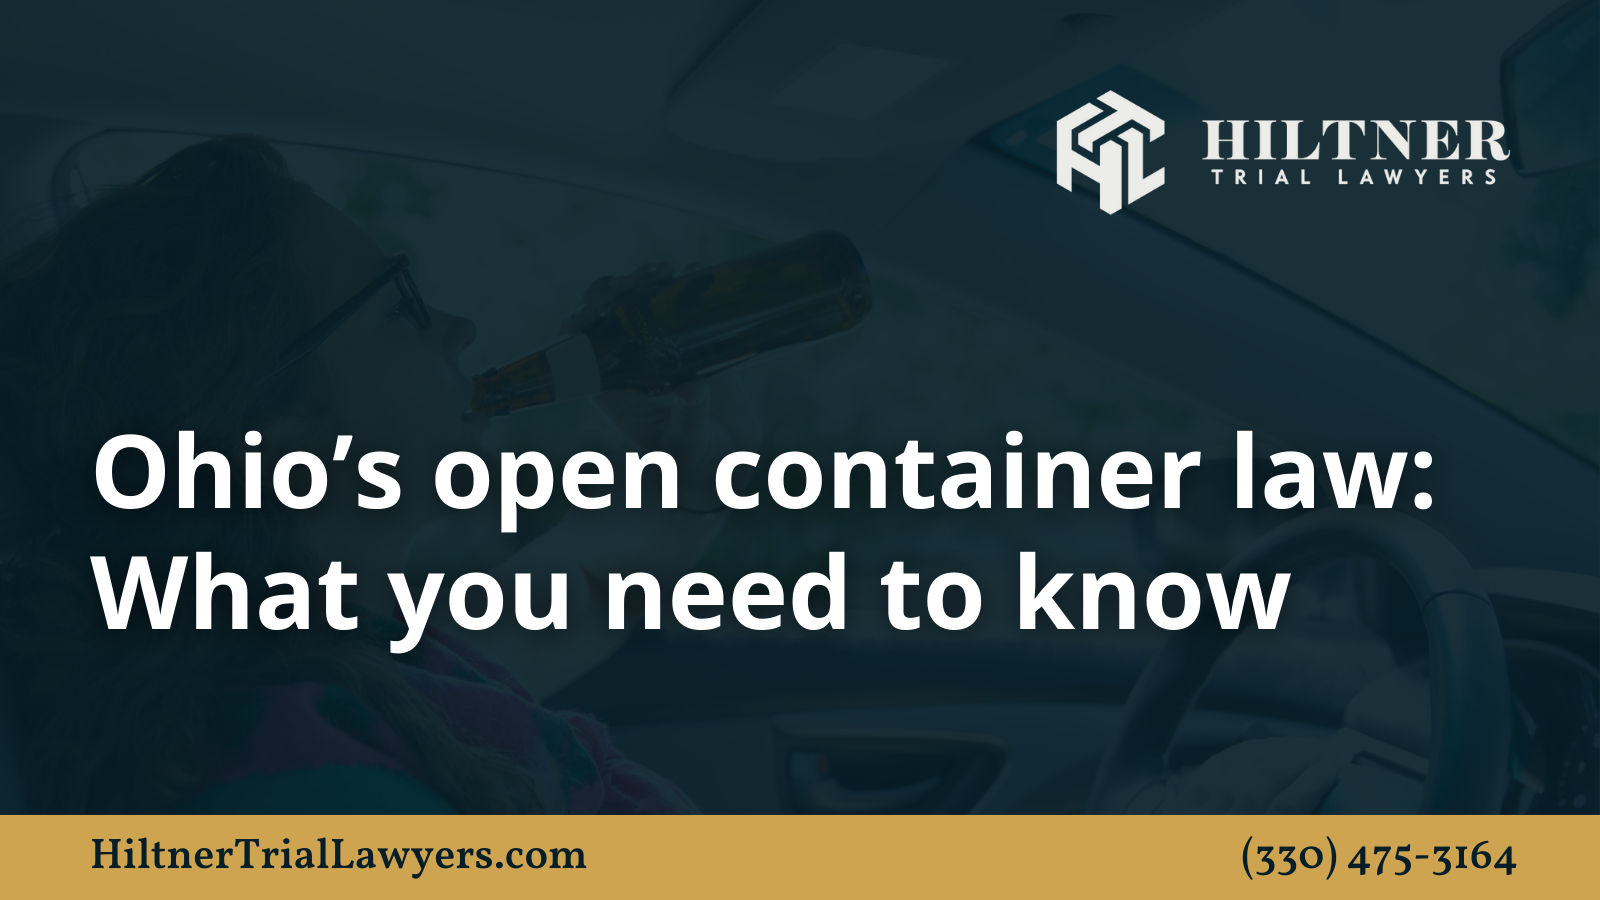 Ohio’s open container law - Hiltner Trial Lawyers Ohio - max hiltner